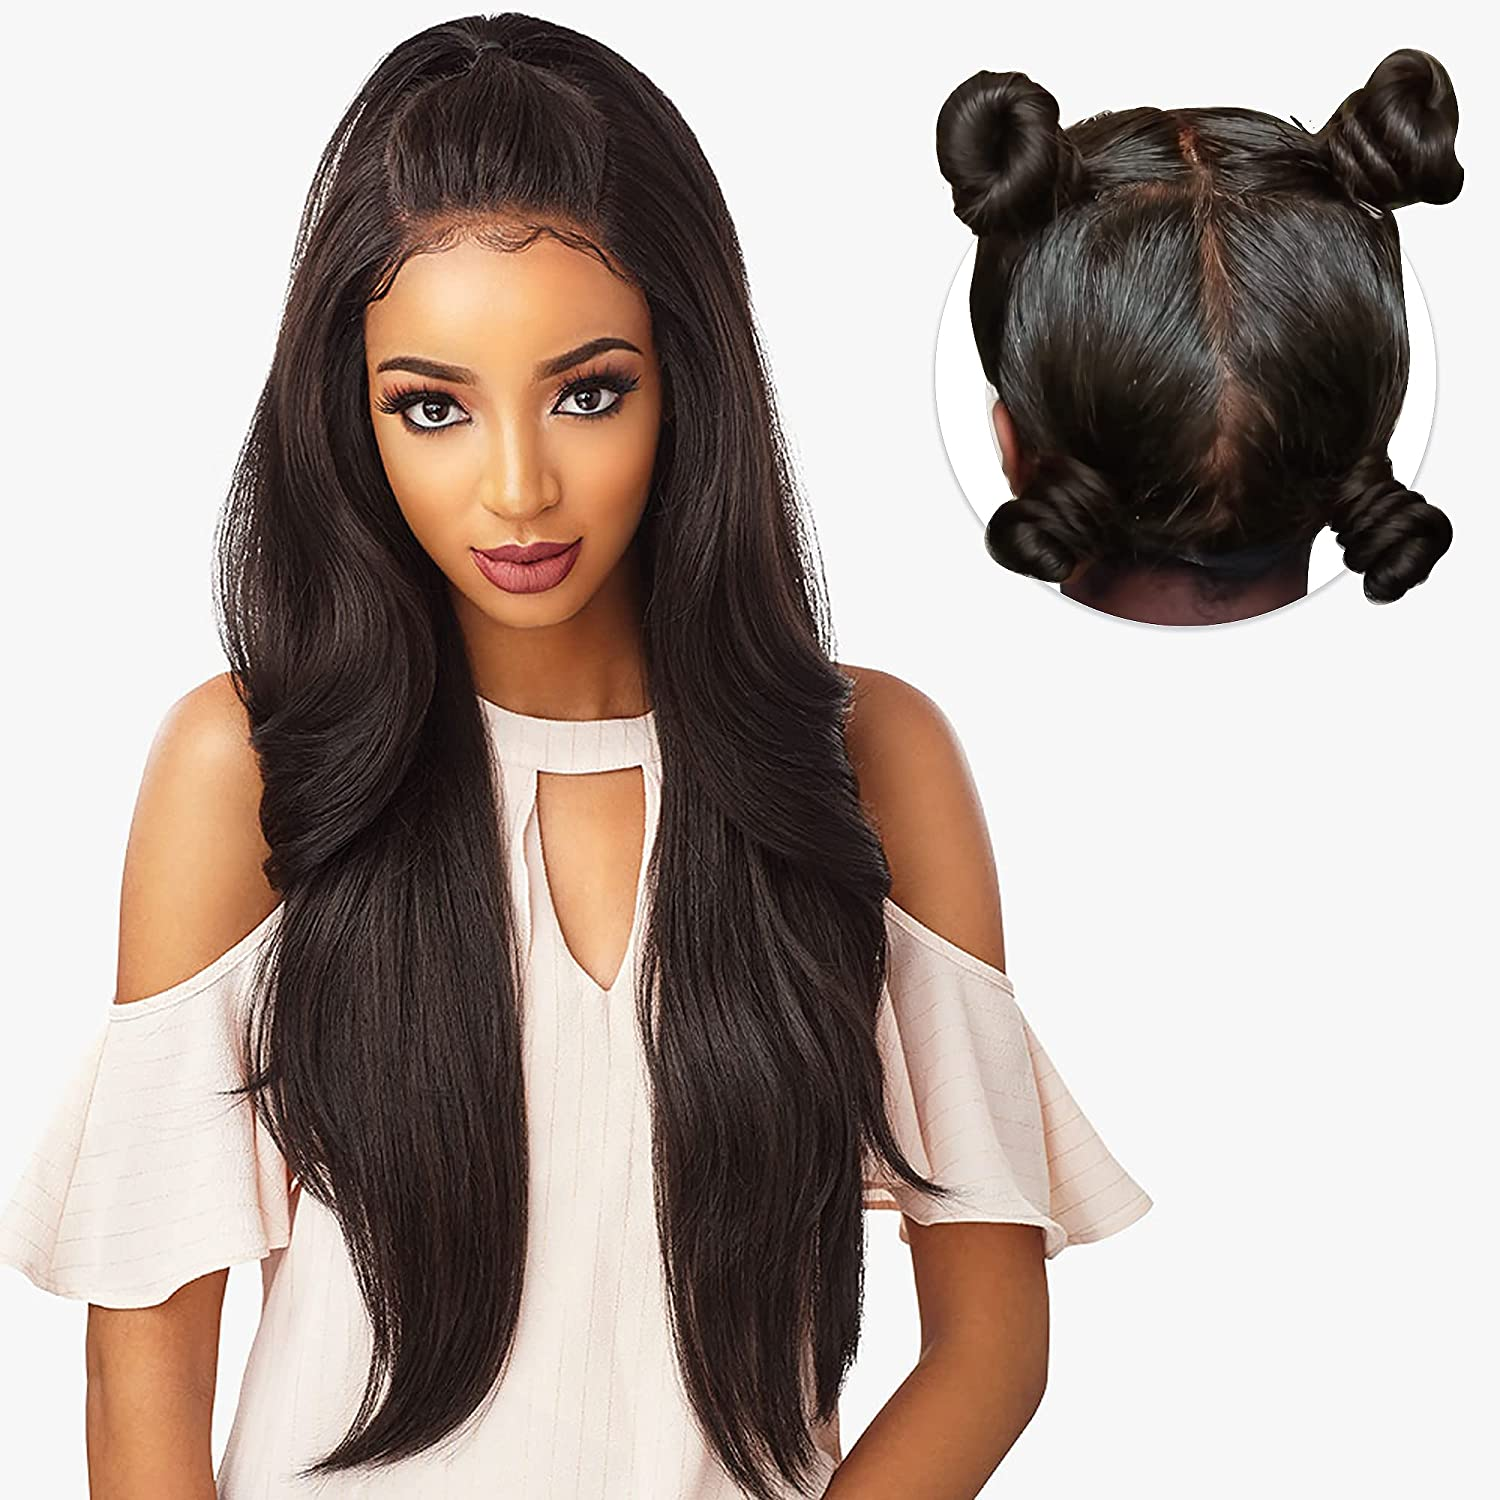 Brazilian Weaves And human Hair Lace Front Wigs, Bone Straight Full Lace Human Hair Wigs For Black Women